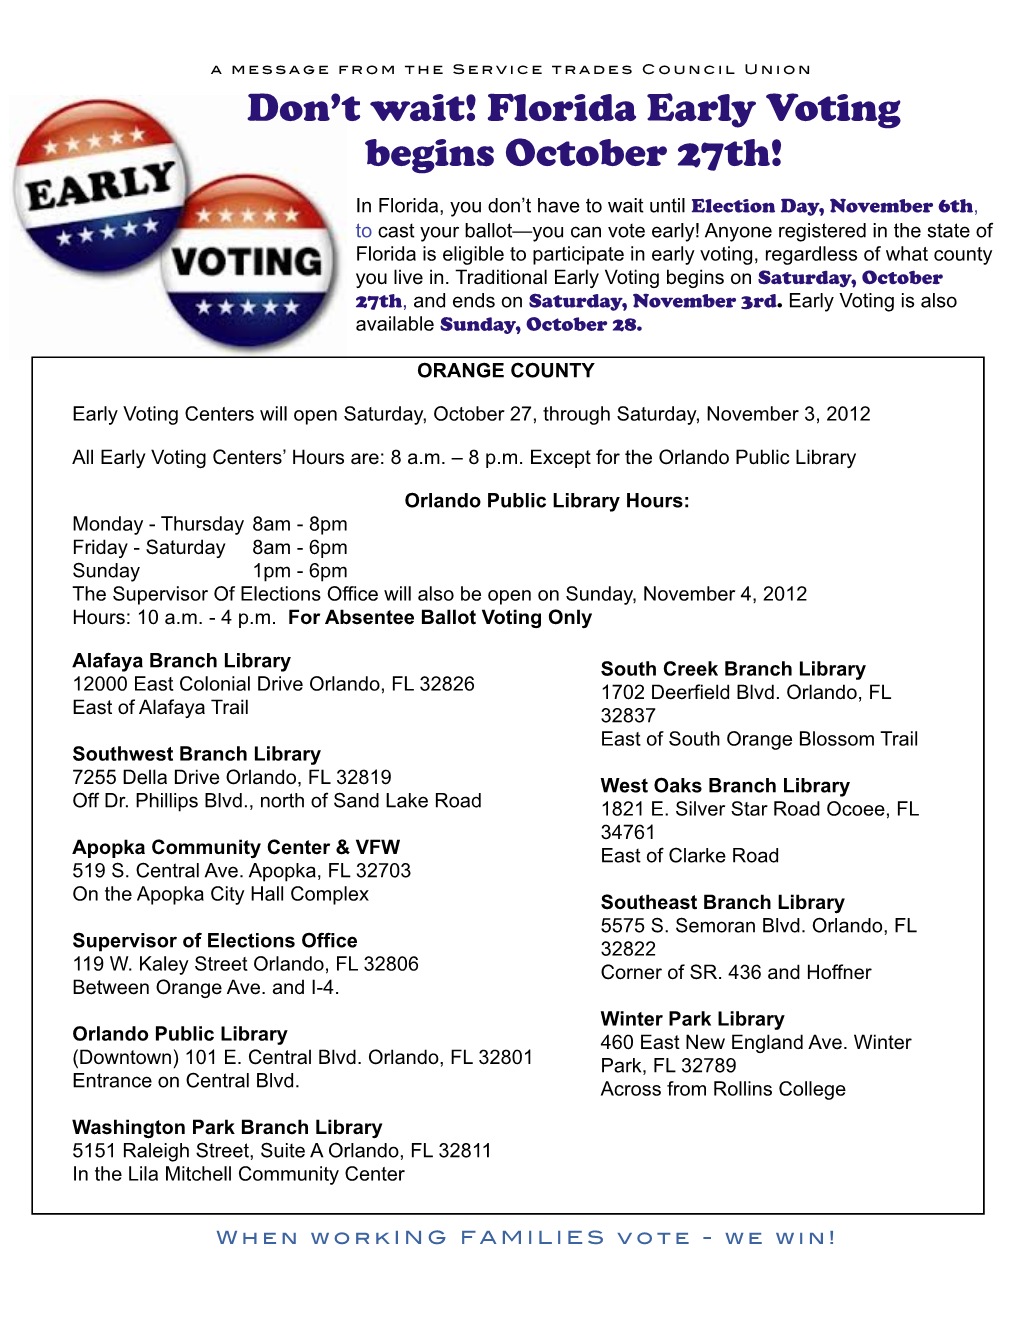 Don't Wait! Florida Early Voting Begins October 27Th!